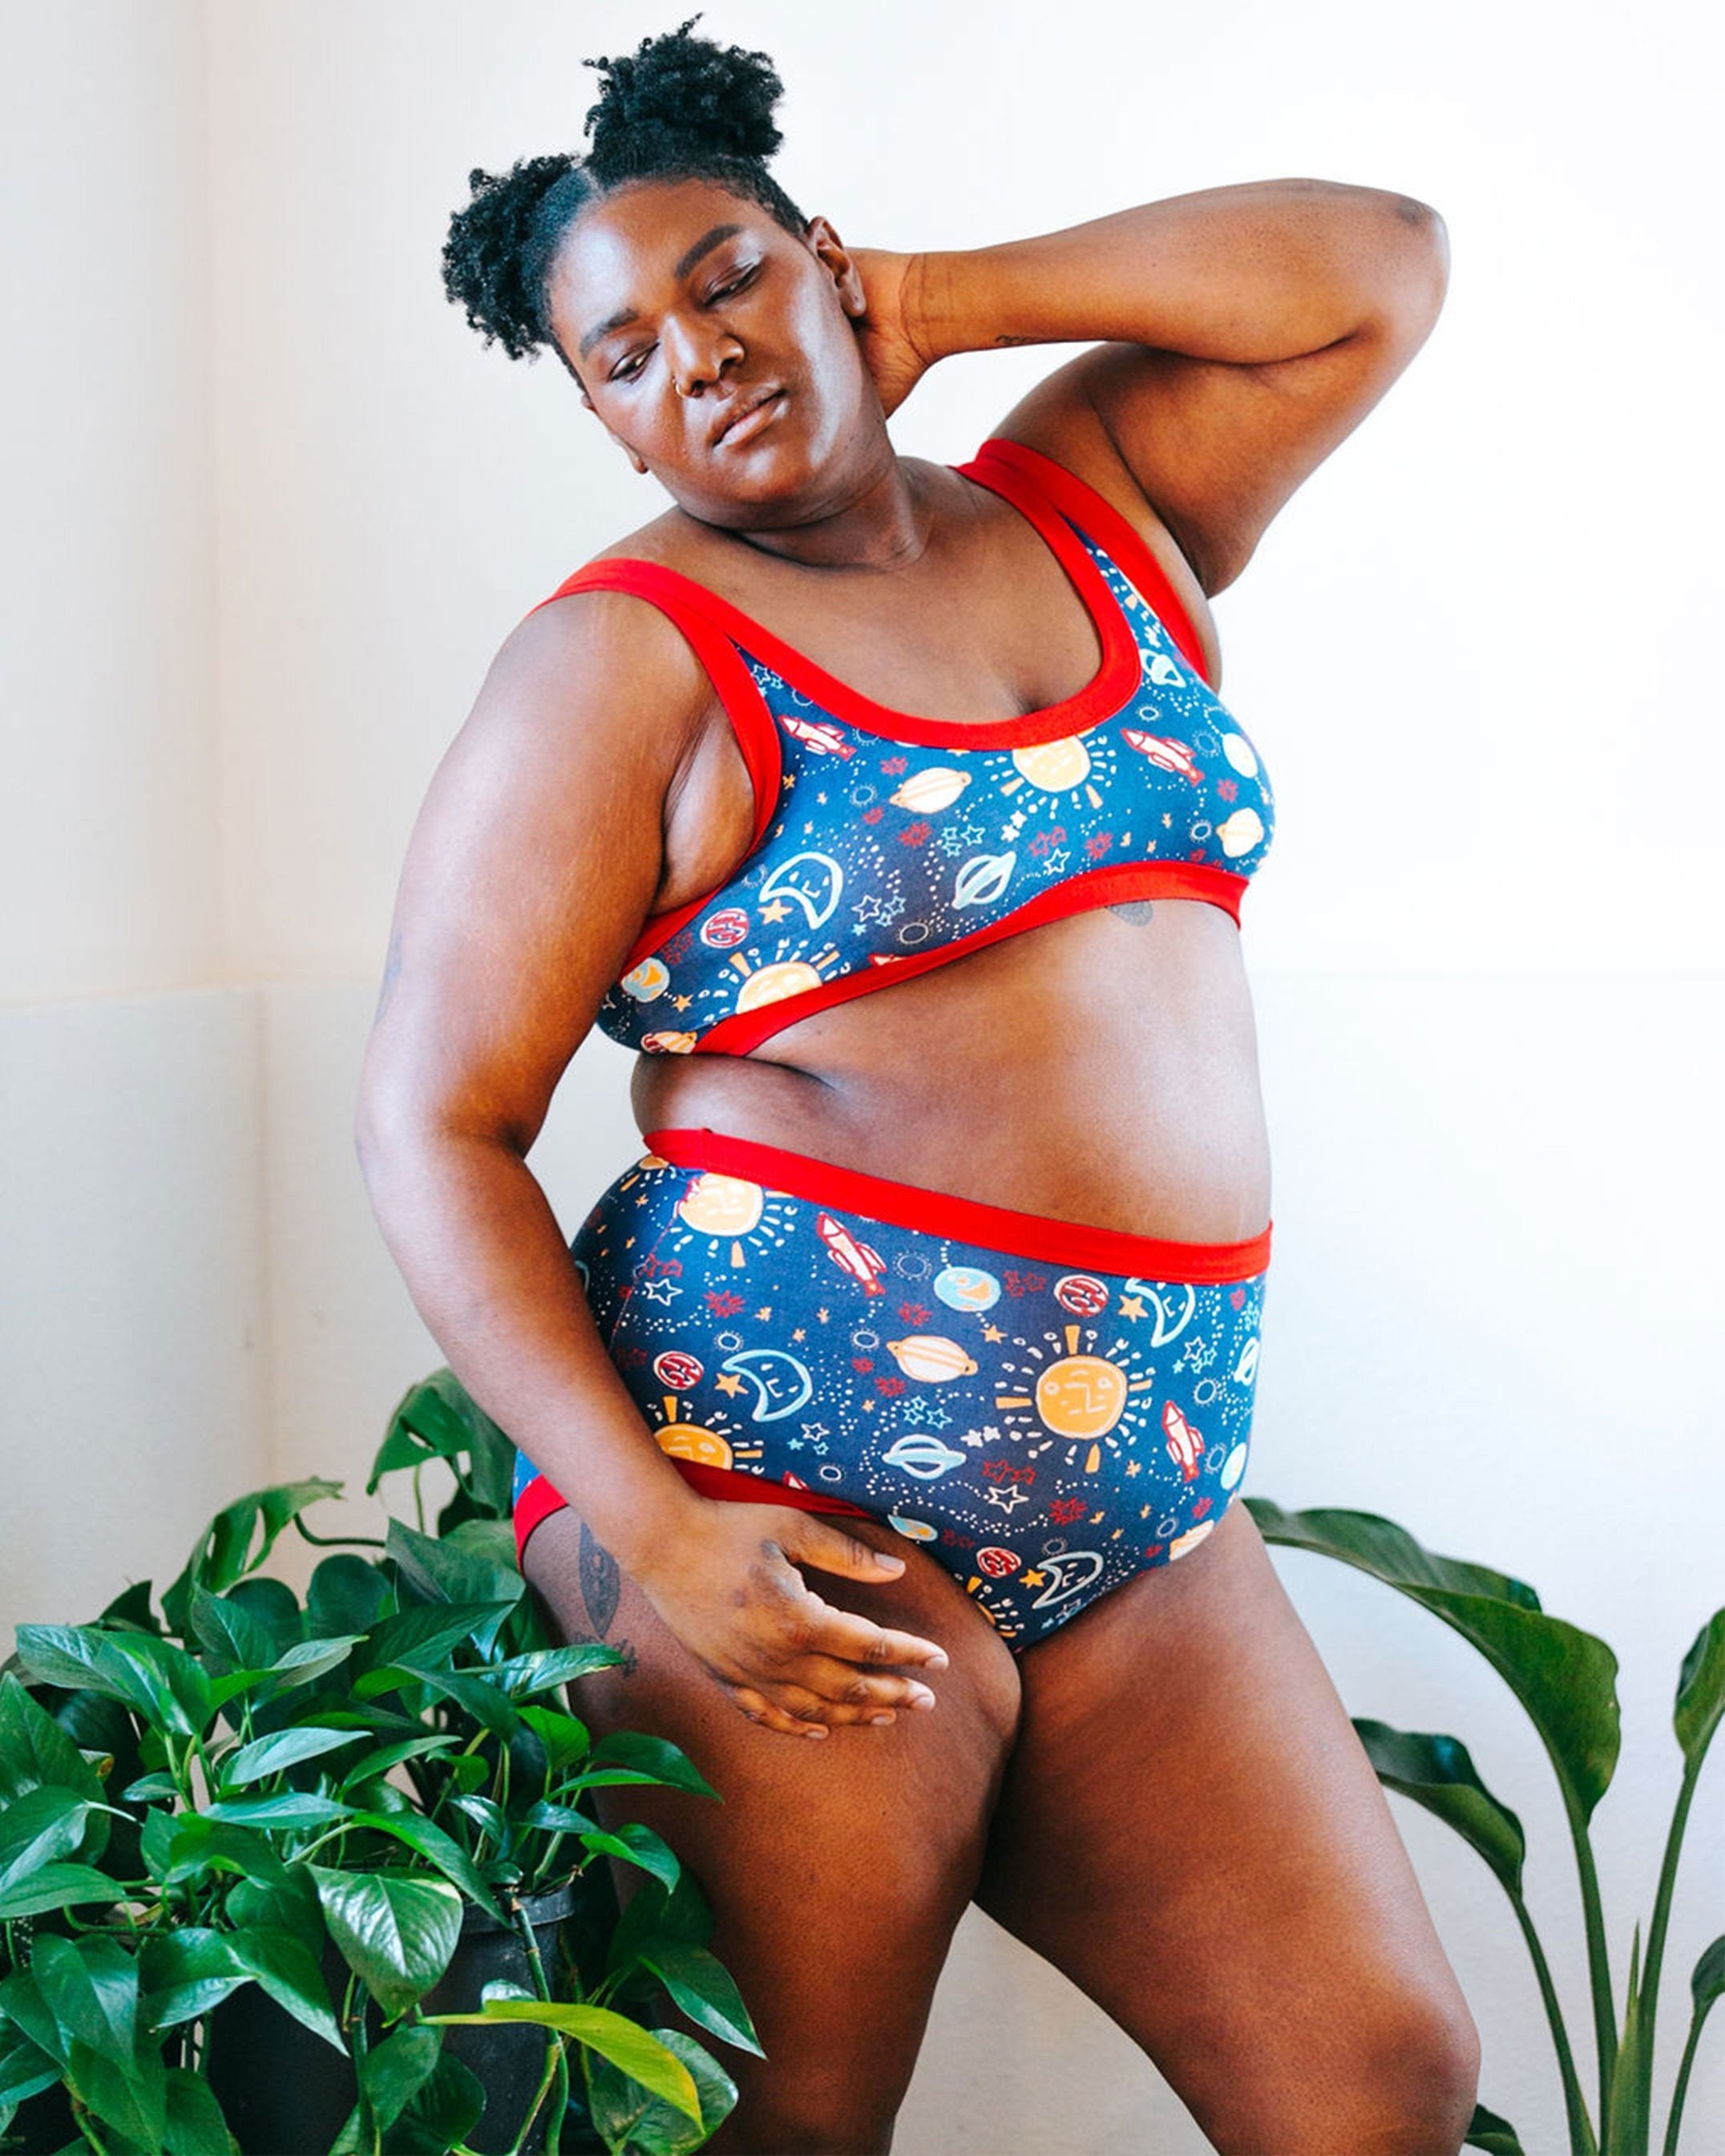 Plus-sized model wearing Thunderpants organic cotton Original style underwear and Bralette in a sun, planets, stars, and universe print with plants around her.